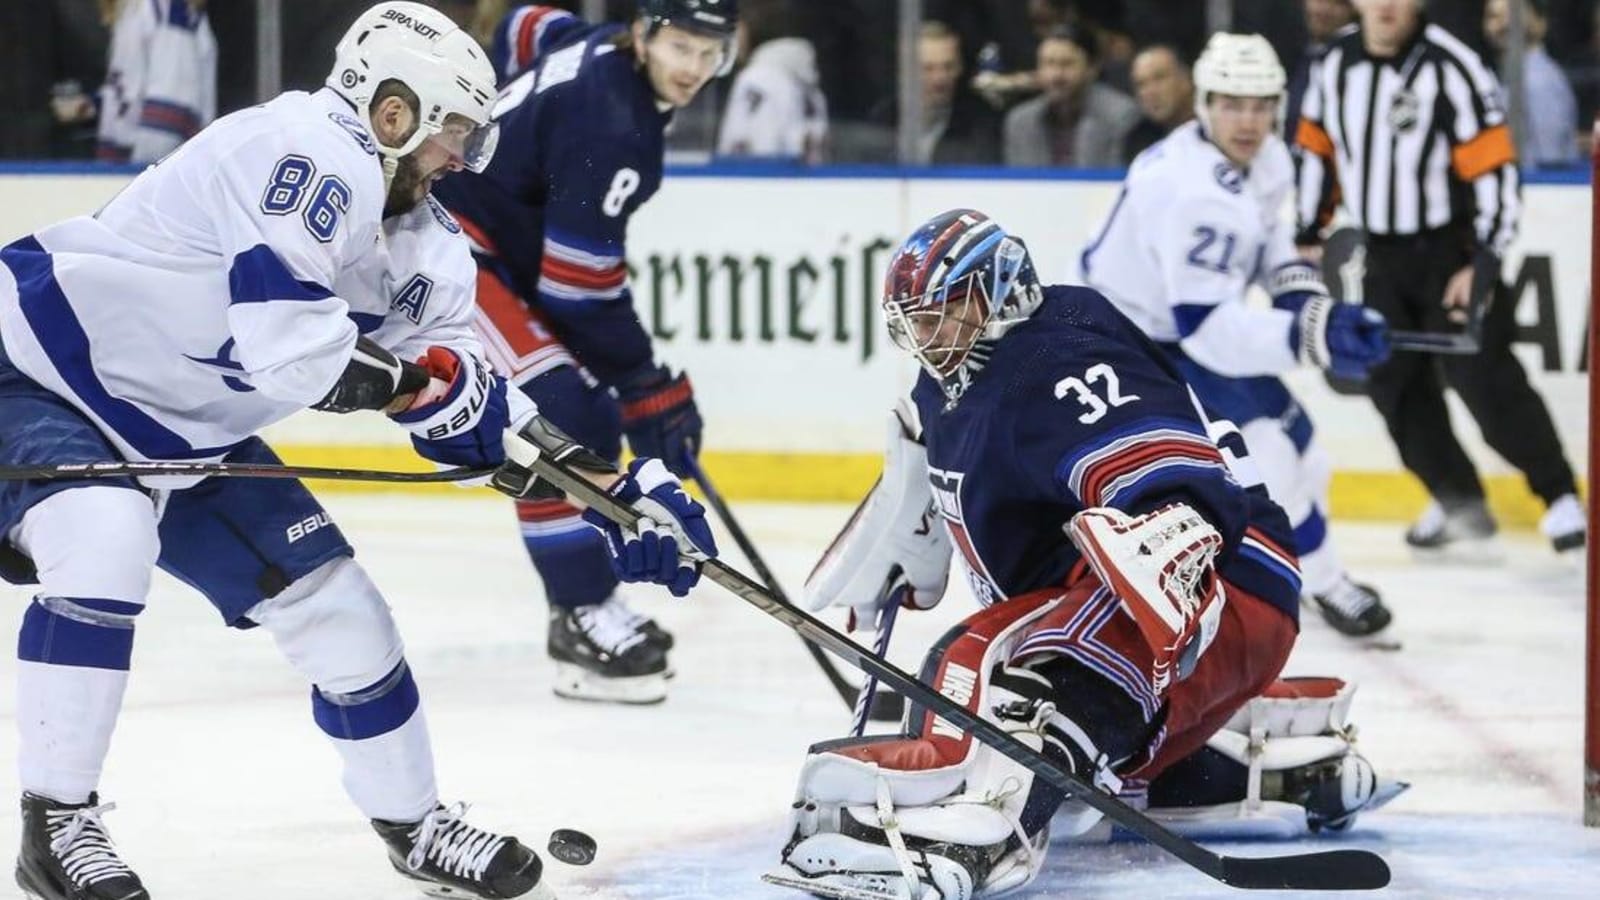 Jonathan Quick stands strong in net as Rangers top Lightning